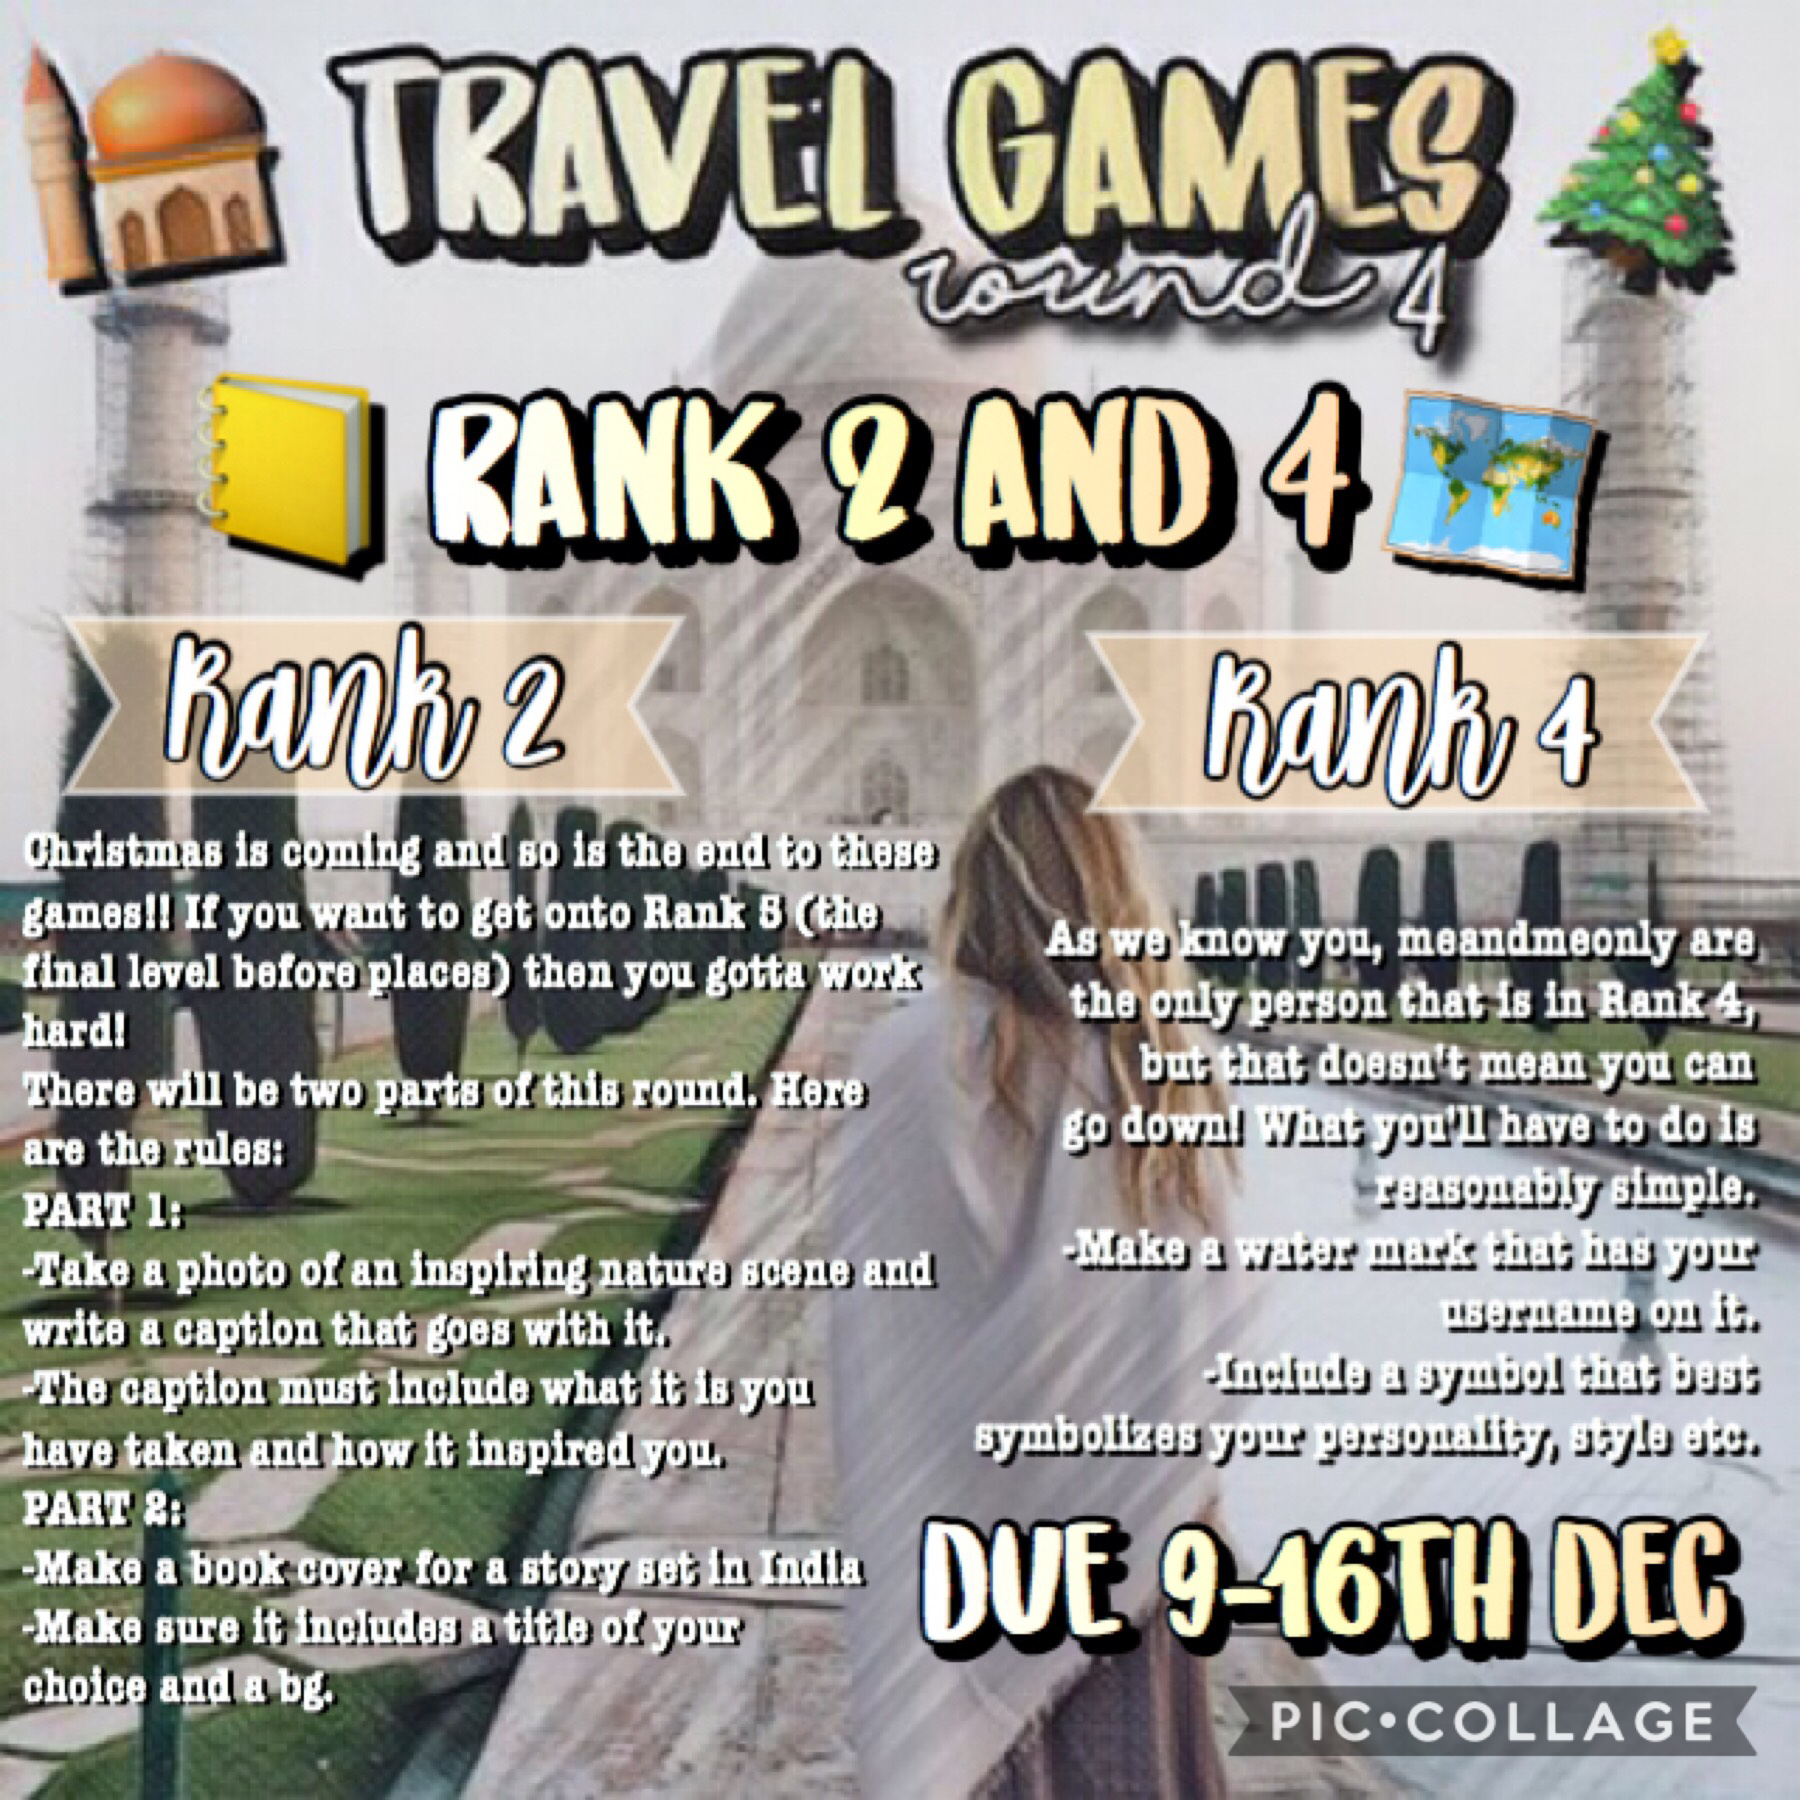 📸Round 4 for people in Rank 2 and 4! I hope you remember what rank you’re in!🌙 
25/11/18